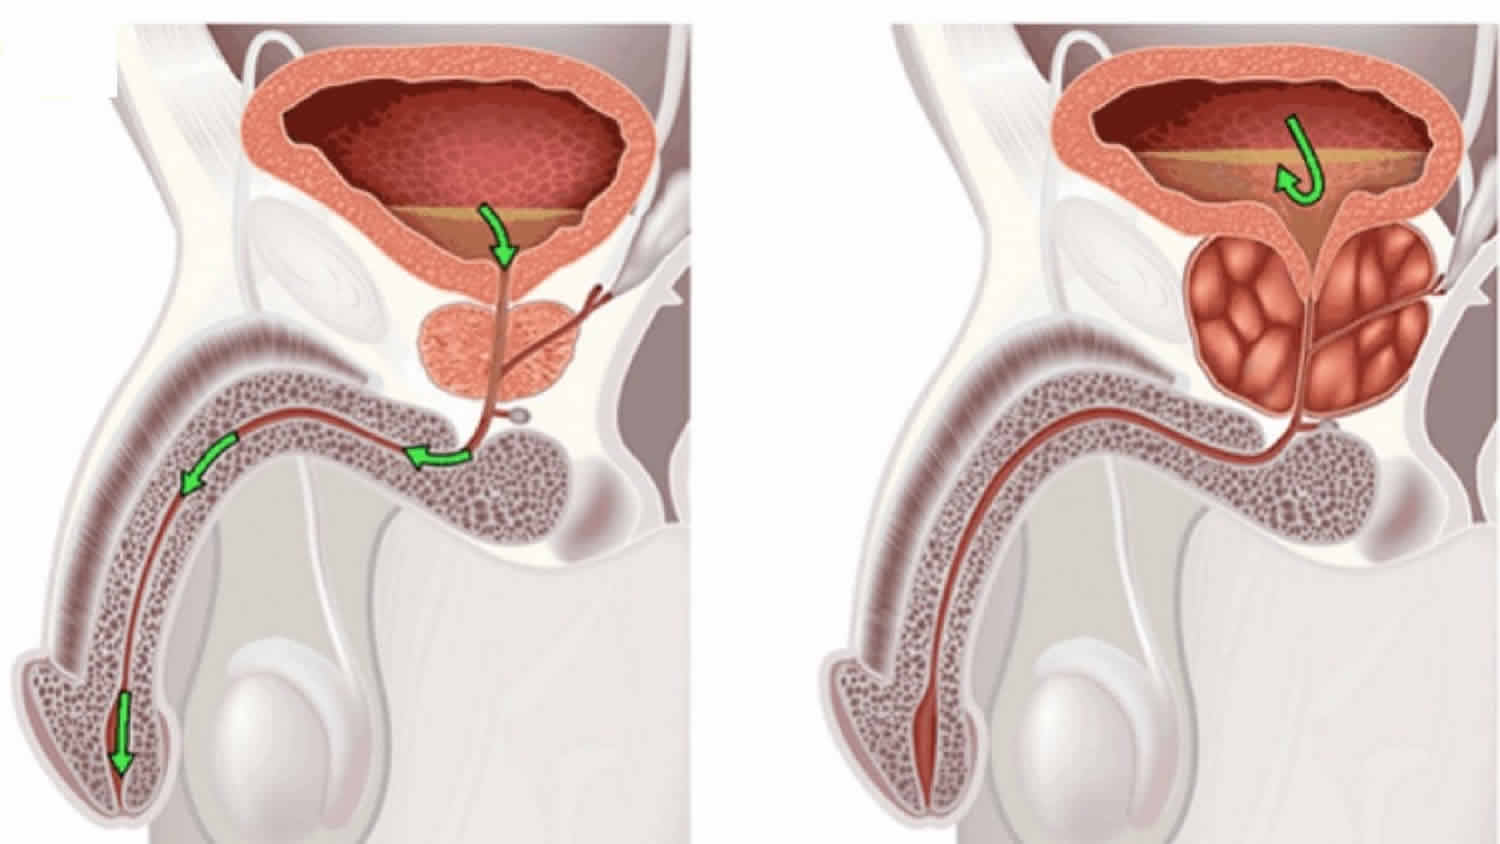 5 Things You Need to Know About Enlarged Prostates